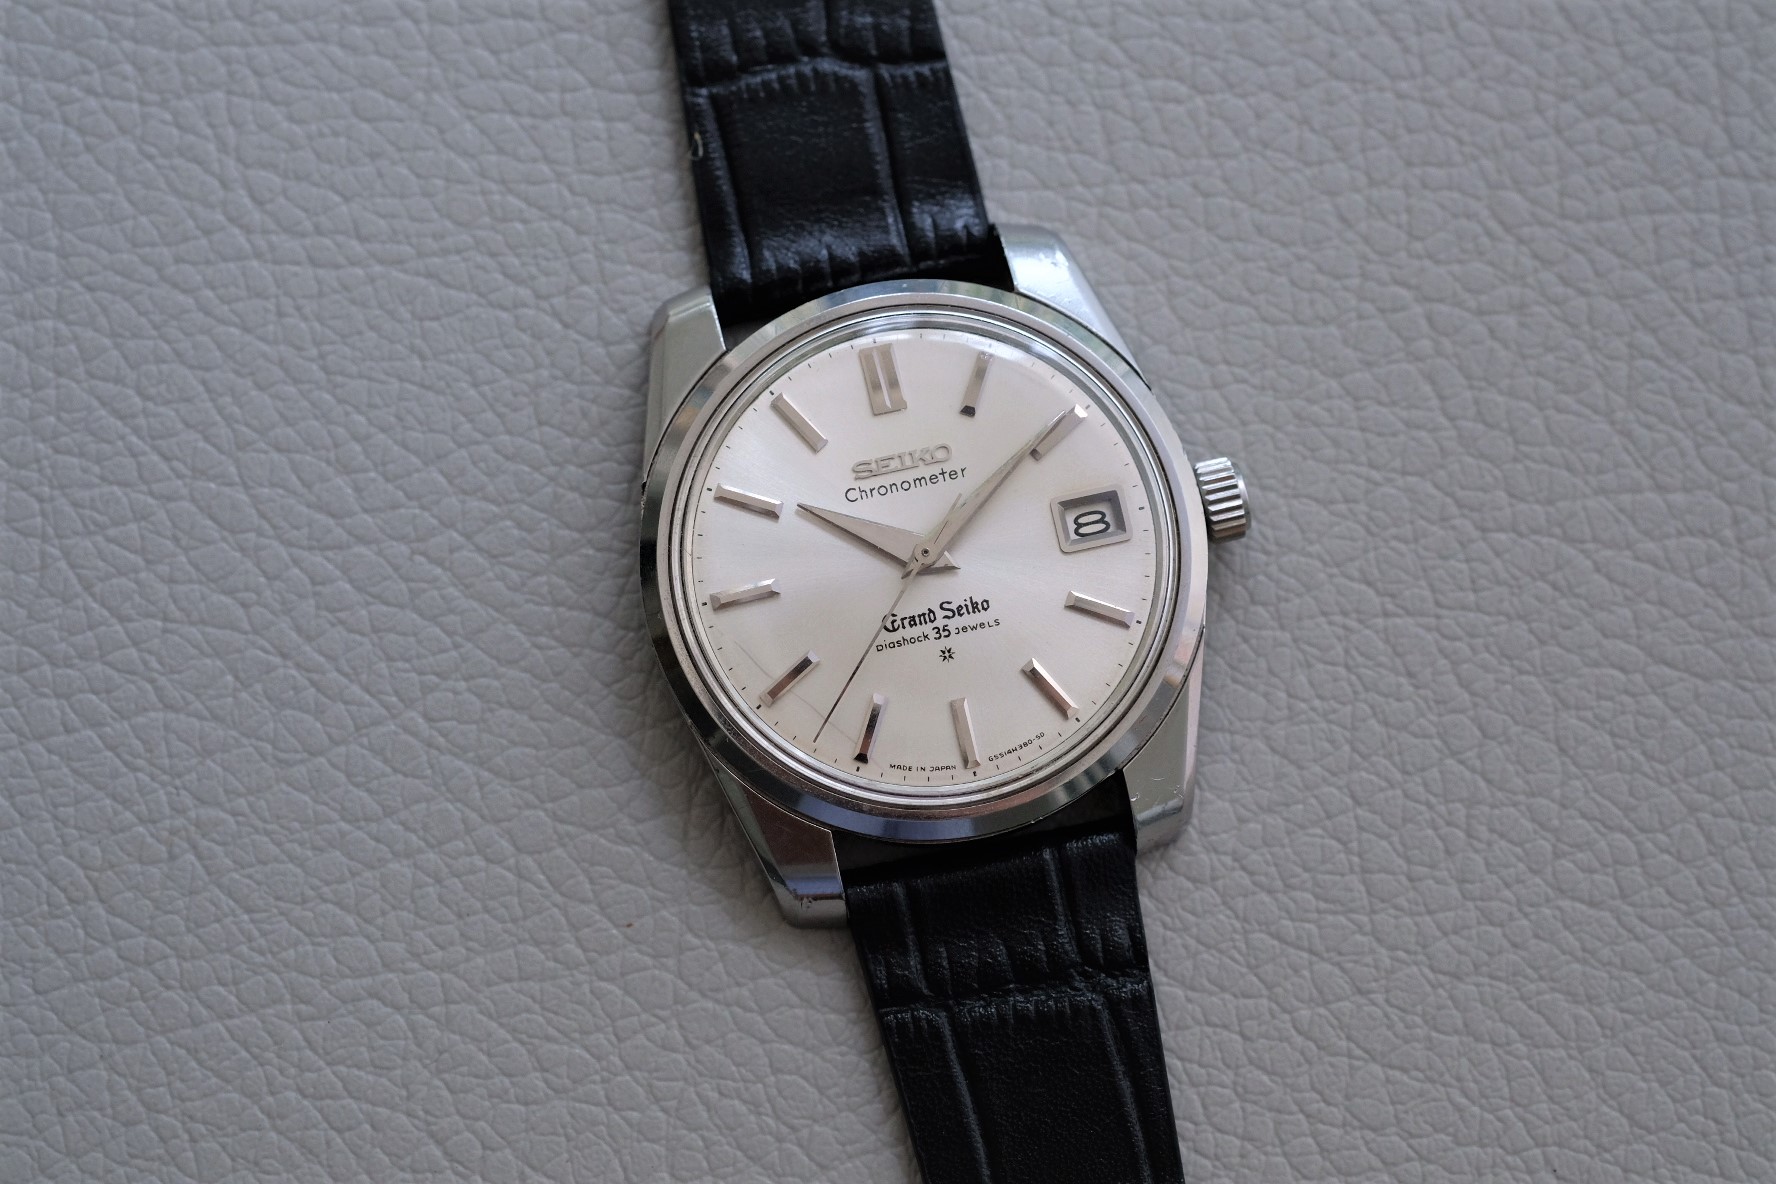 SOLD - Grand Seiko 43999 (SD Dial) - REDUCED | Omega Forums